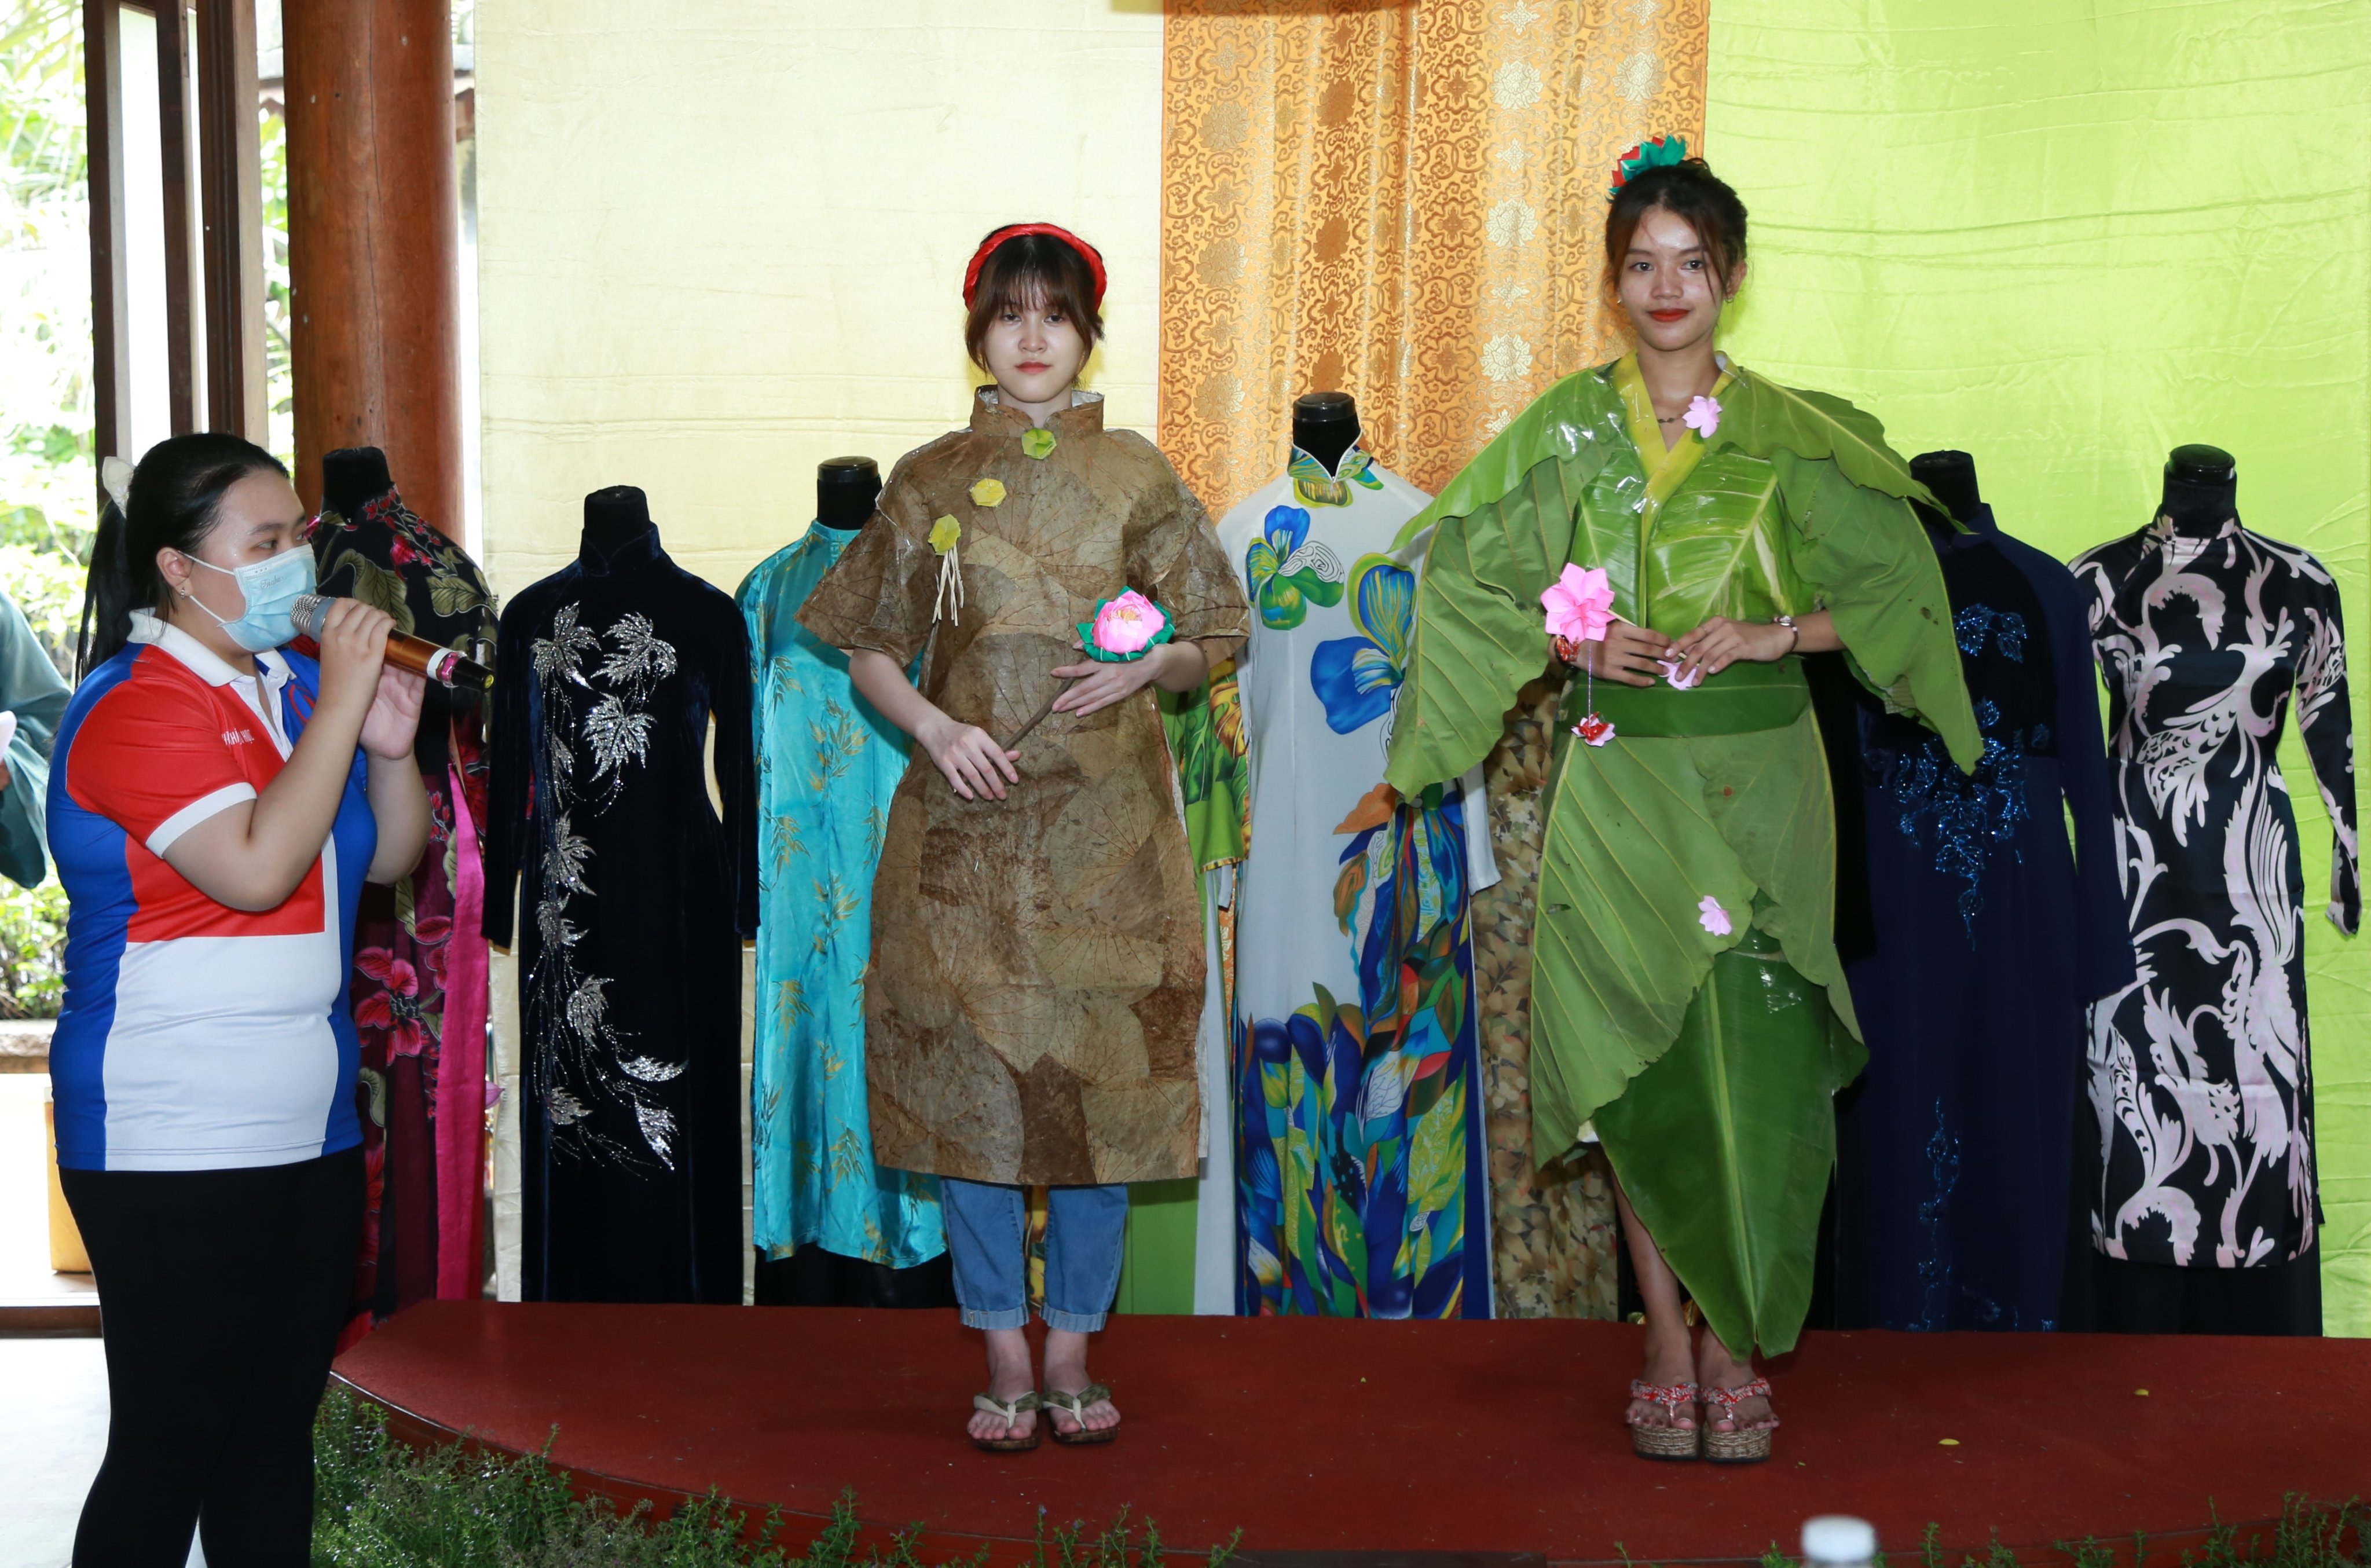 Participants showcase costumes made from leaves during a fashion show at the ‘Leaves Festival’ at Ao Dai Museum in Thu Duc City under Ho Chi Minh City, May 29, 2022. Photo: Handout via Tuoi Tre